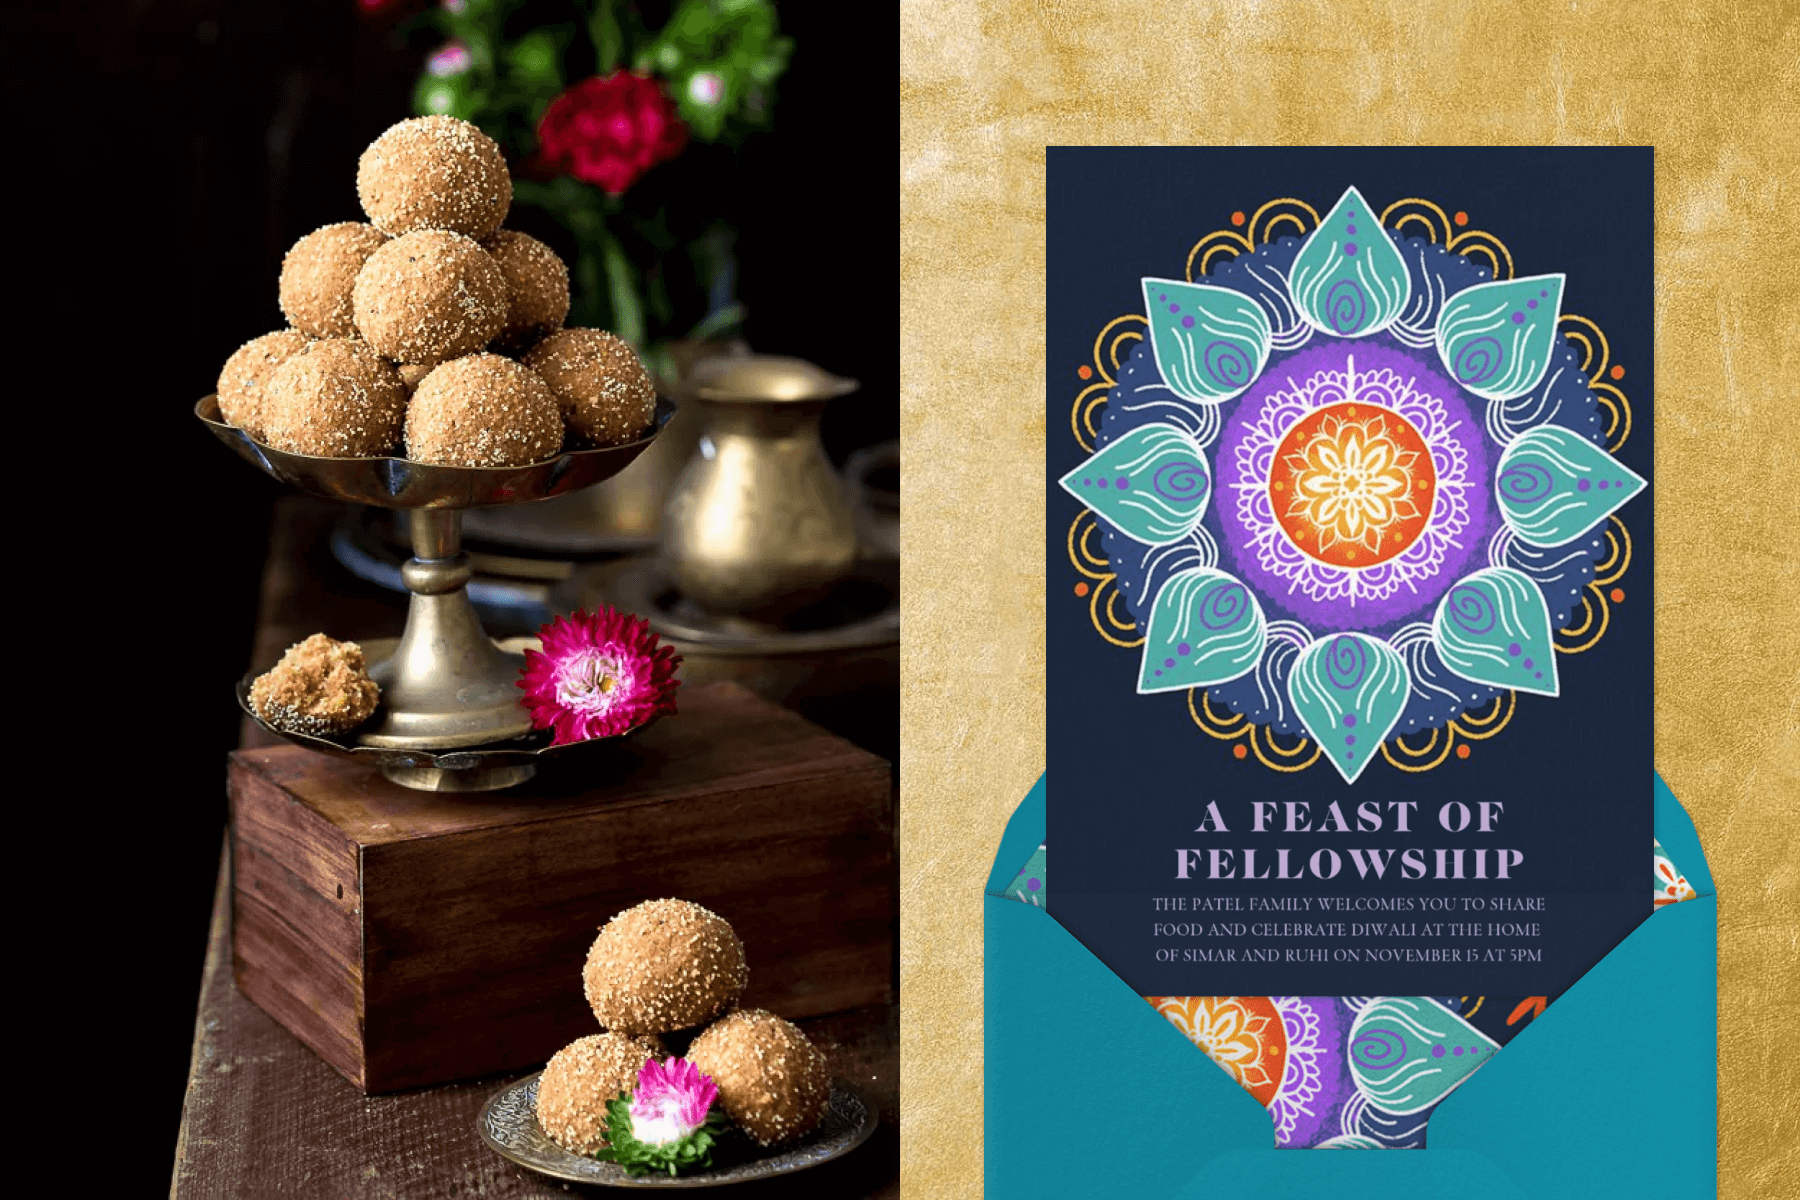 Right: Churma ladoo elegantly stacked on pewter tableware; Right: An illustrated Diwali invitation with a rangoli design.